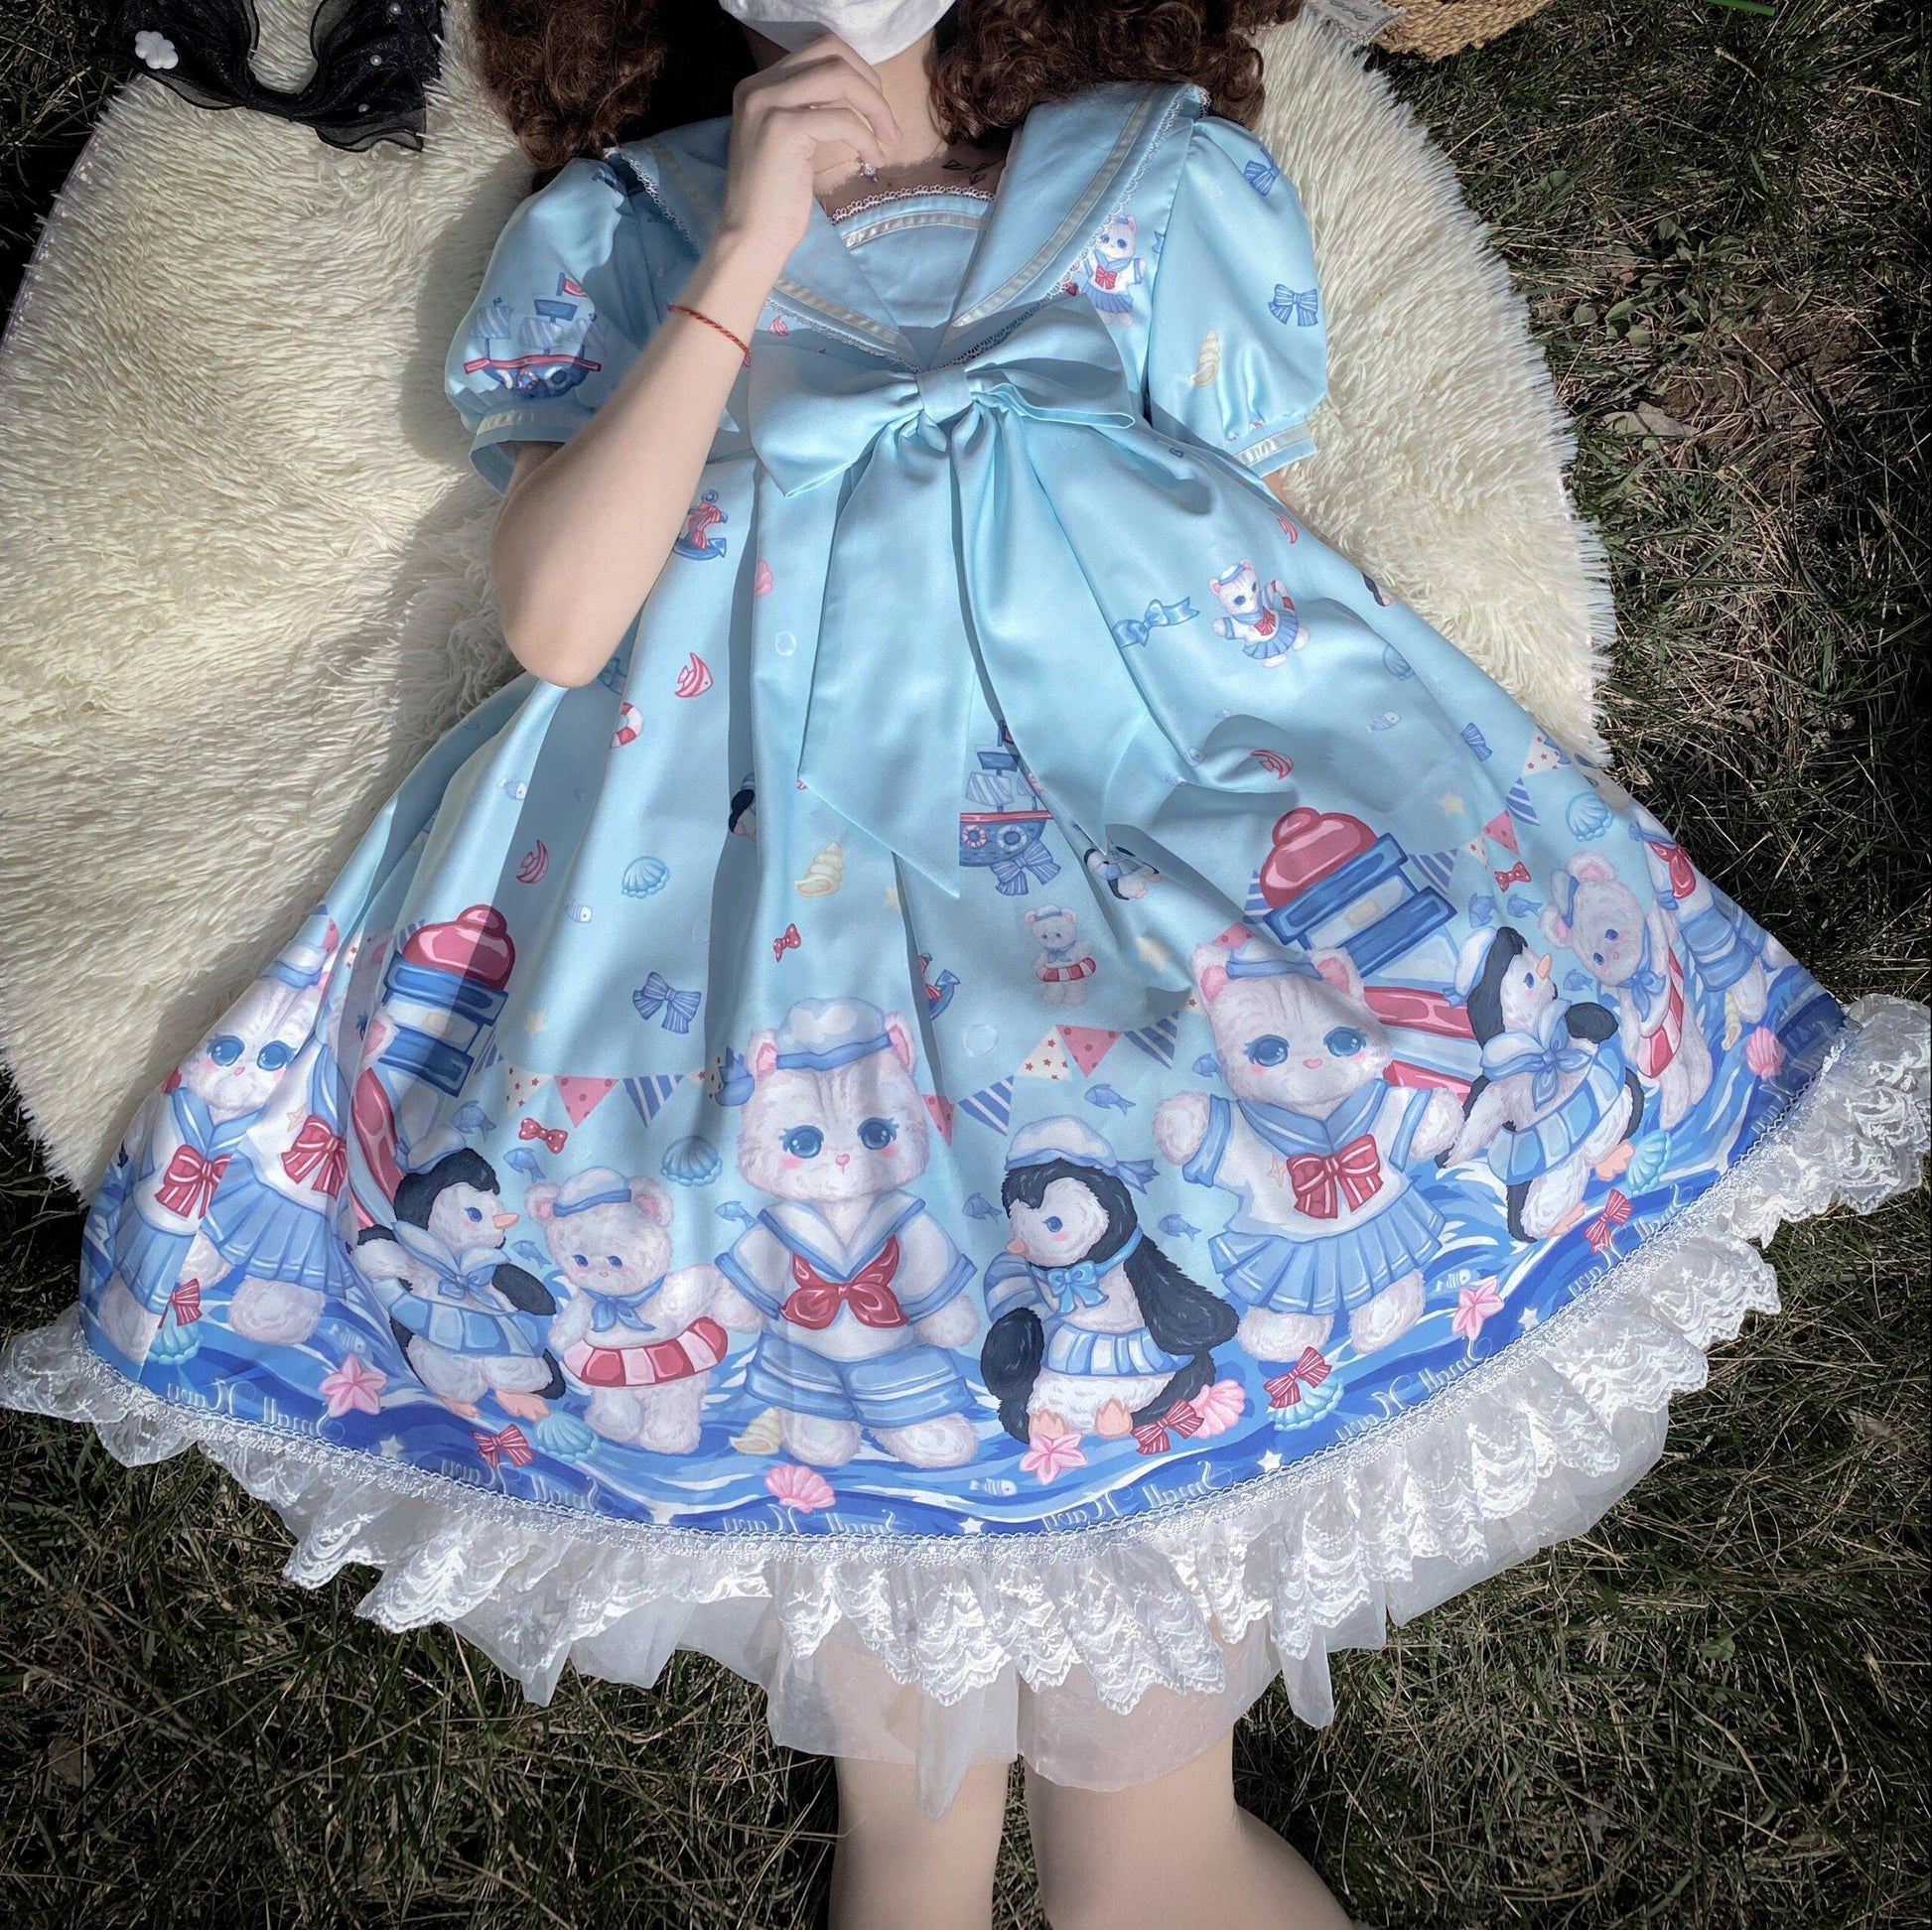 Lolita Dress With Cute Cat and Penguin Print - All Dresses - Clothing - 6 - 2024